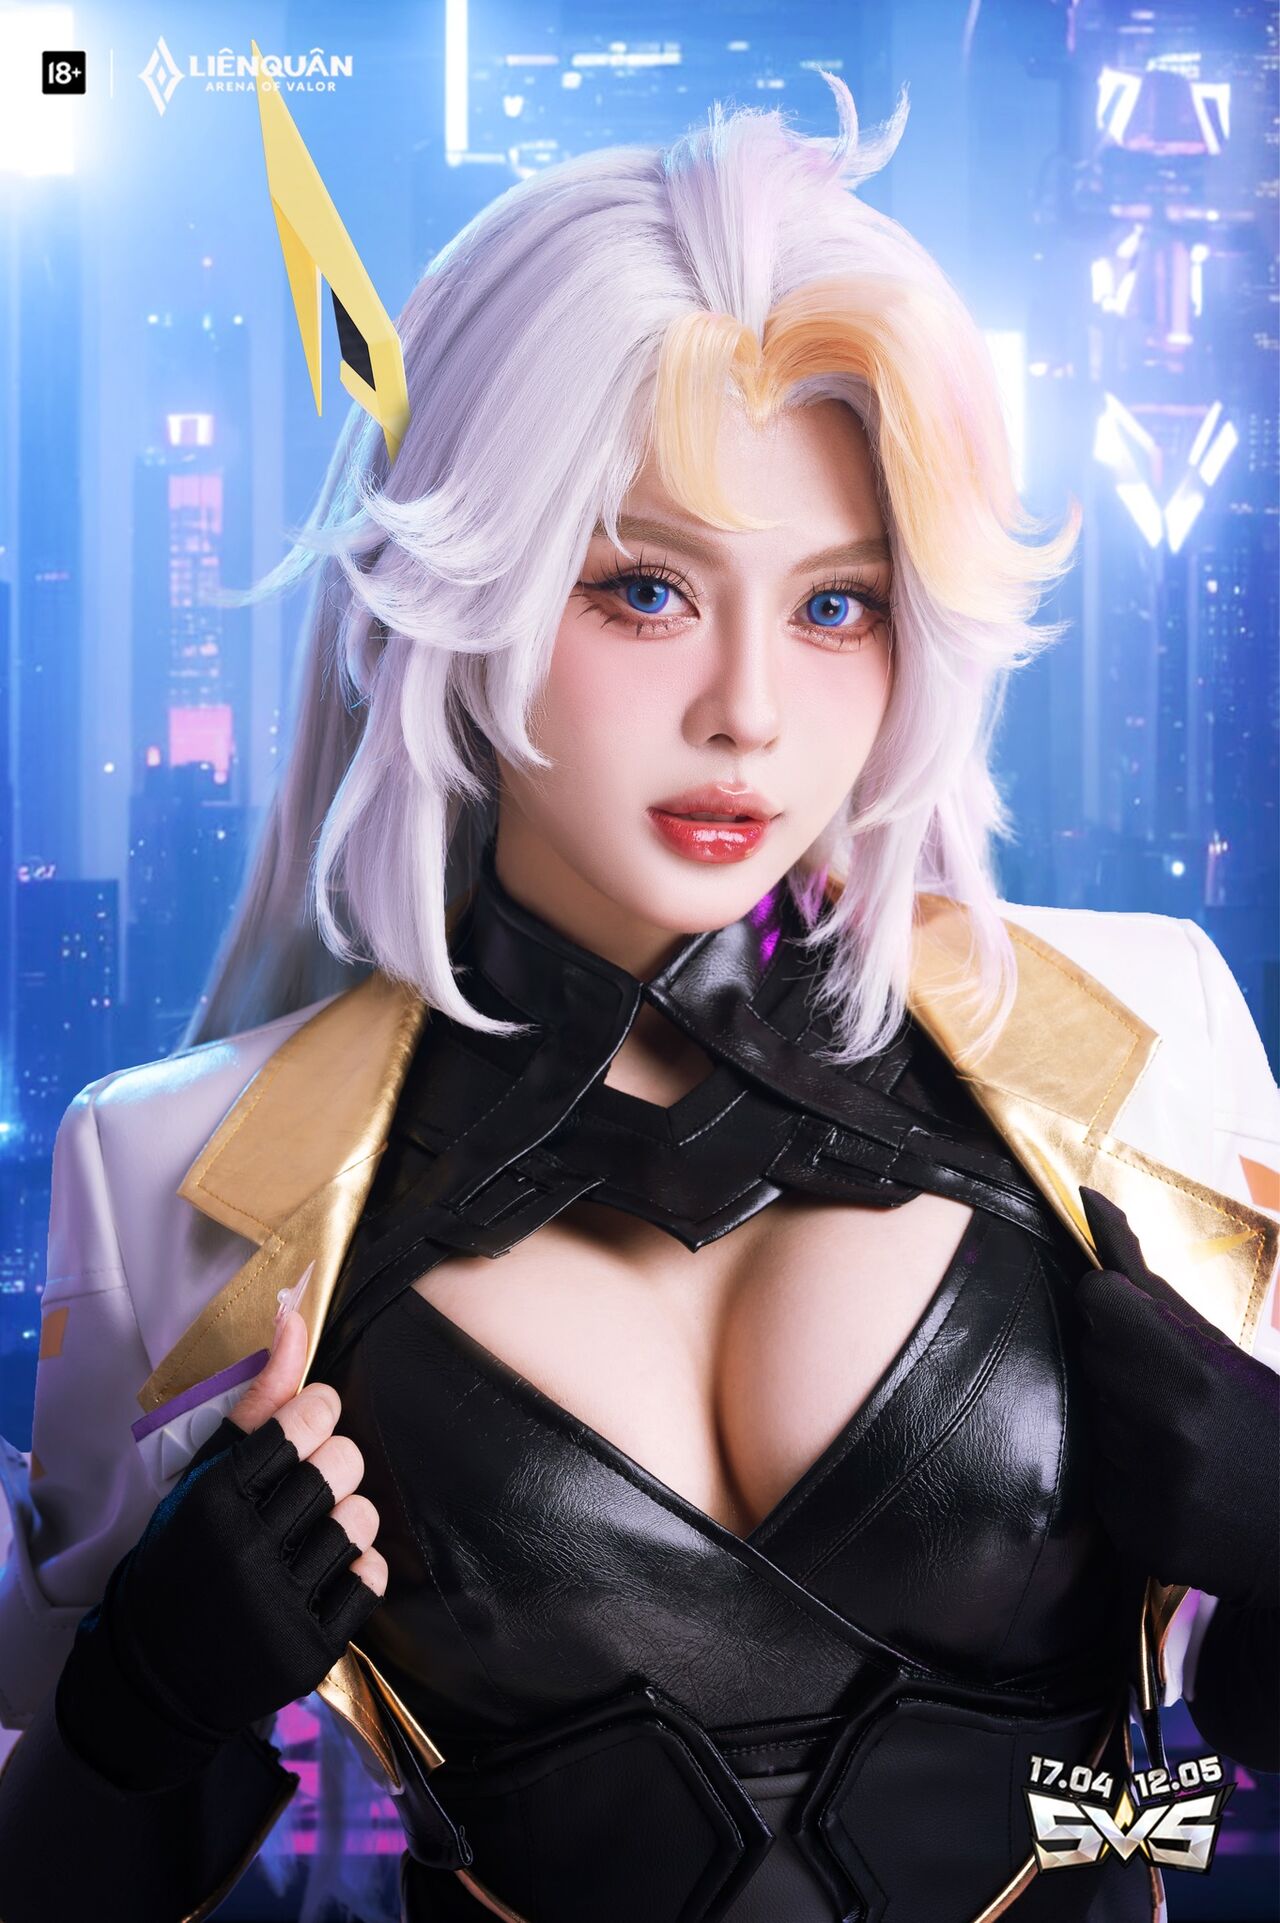 Arena of Valor Cosplay Lauriel Star Seeker